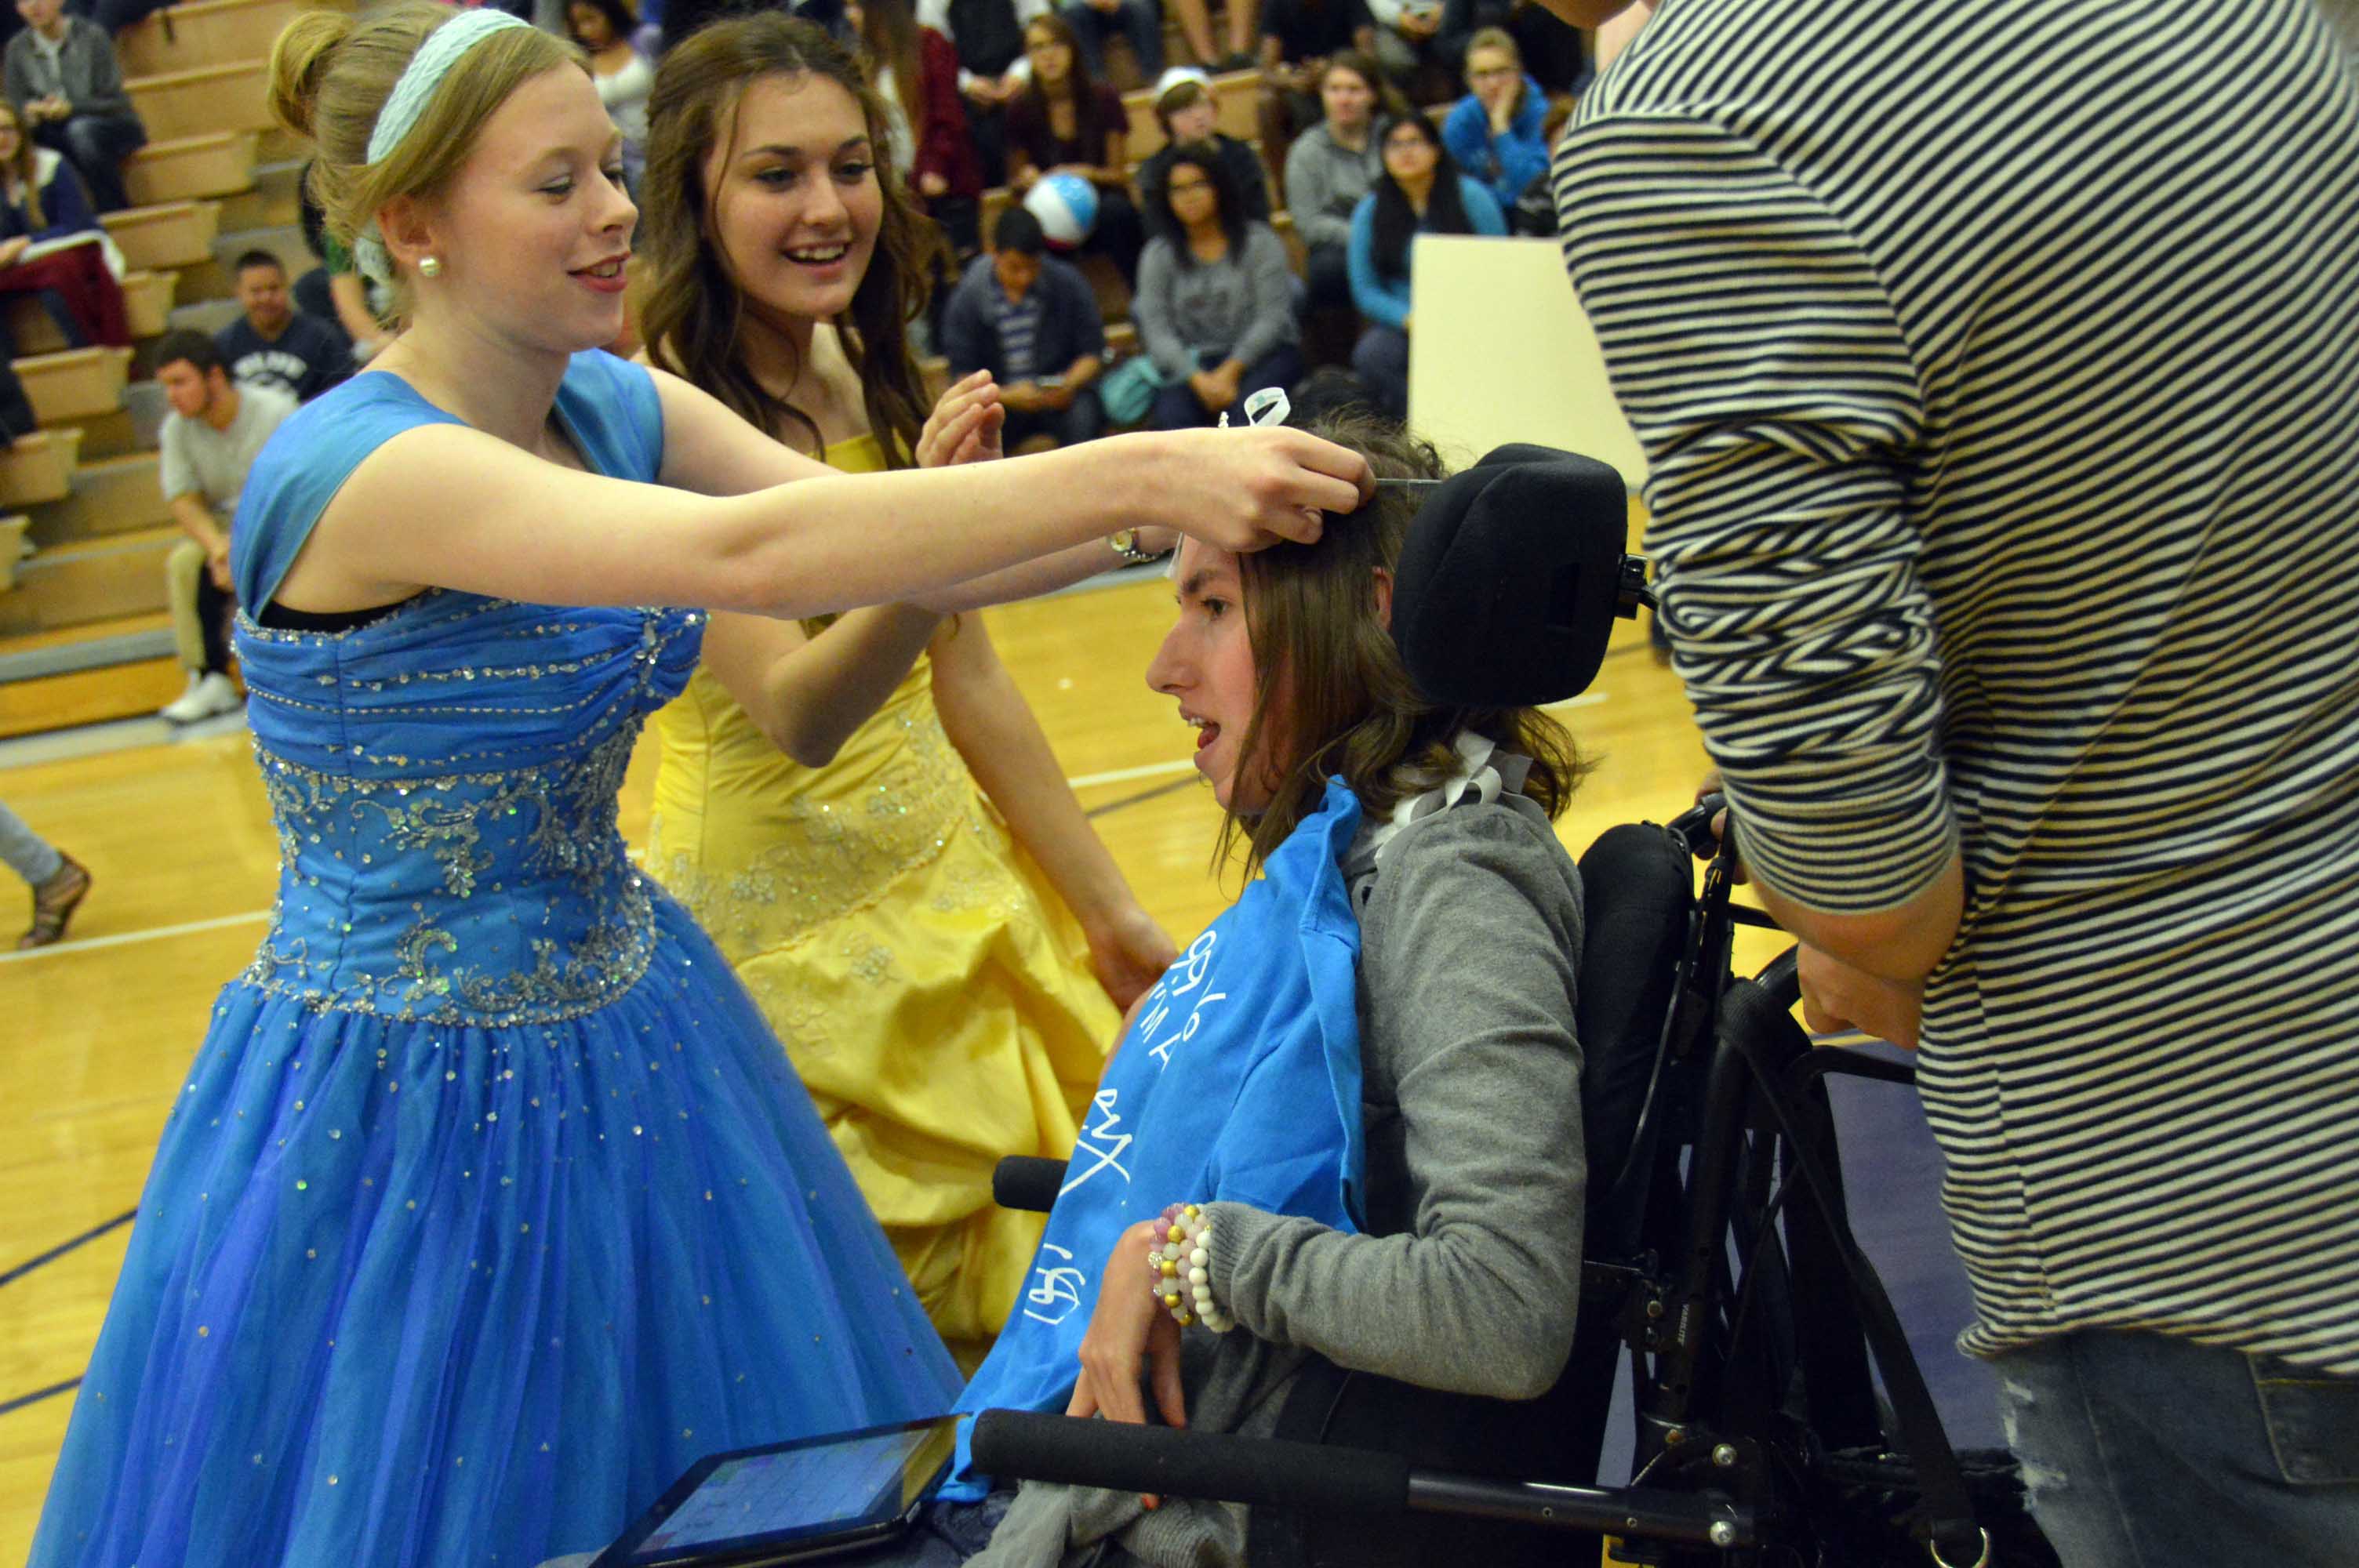 Photos: Hunter students raise money, dress as princesses for girl with cerebral palsy